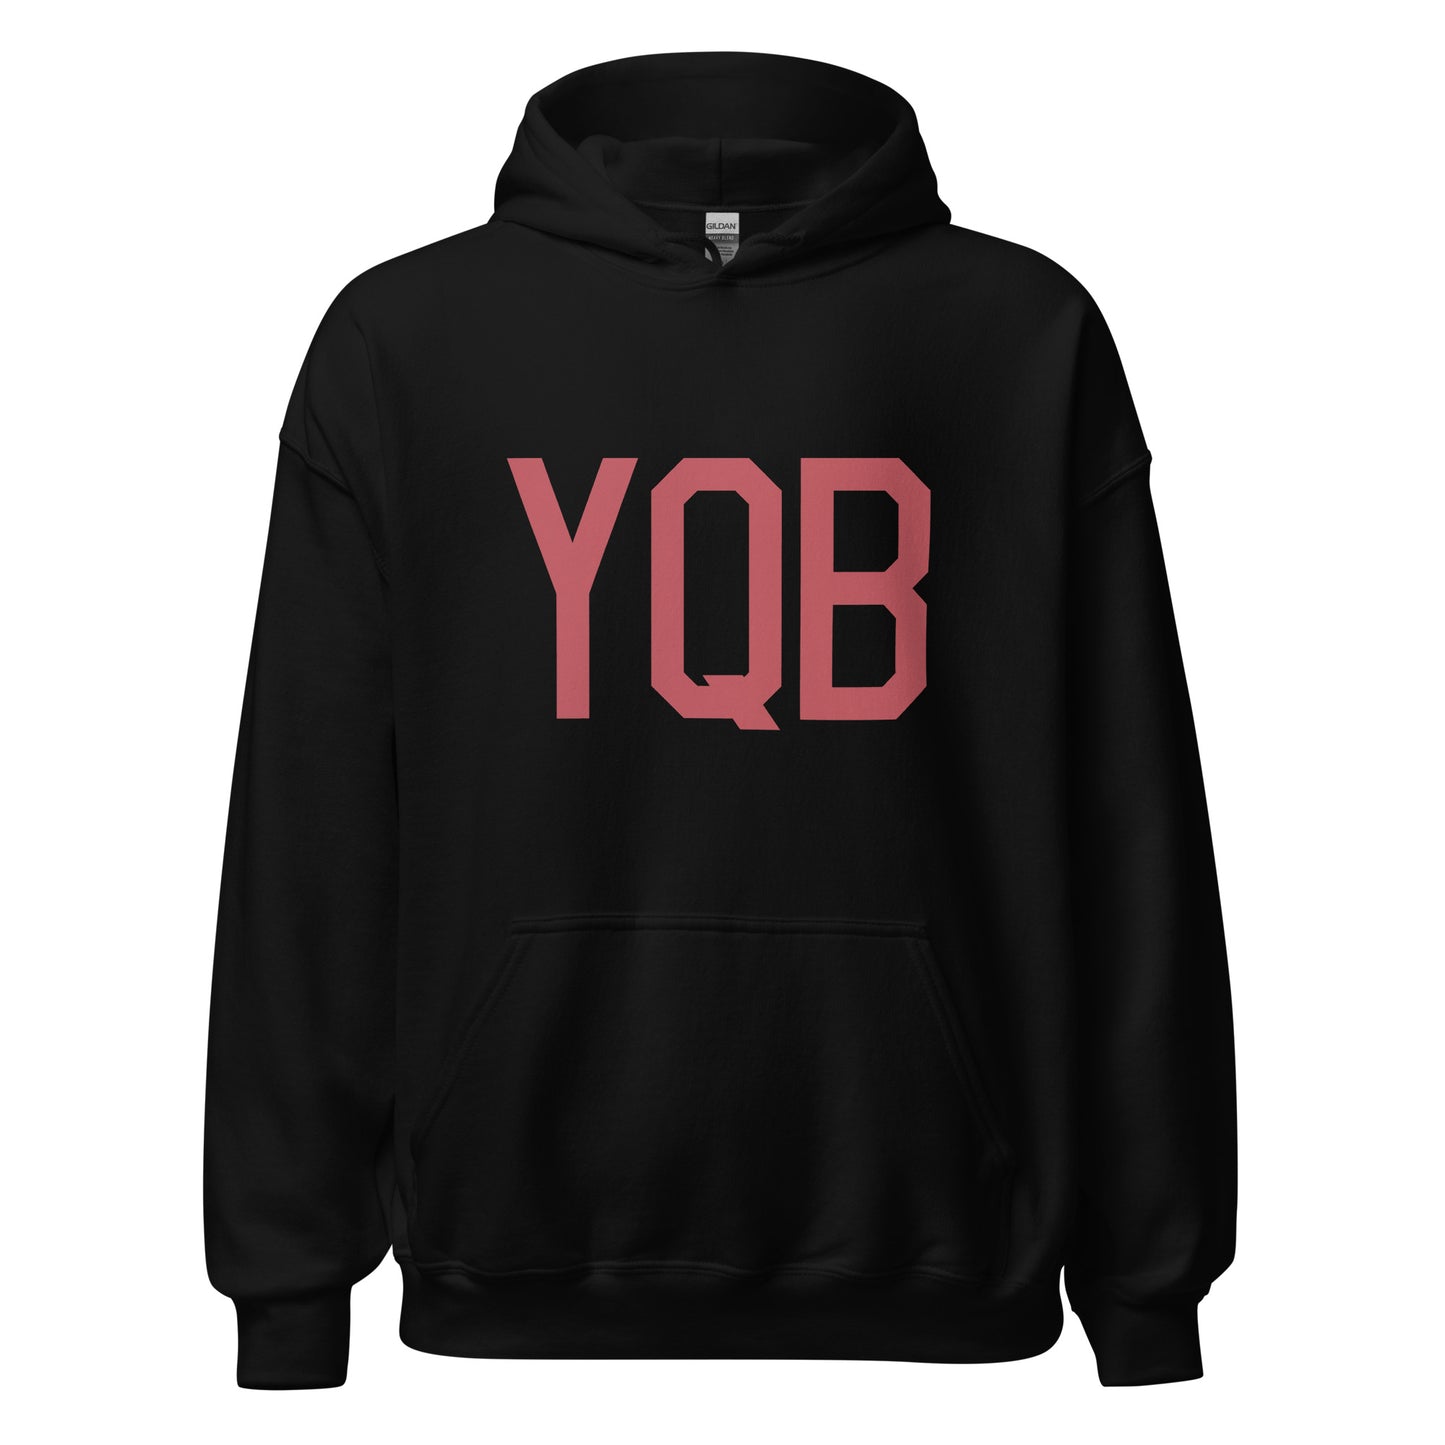 Aviation Enthusiast Hoodie - Deep Pink Graphic • YQB Quebec City • YHM Designs - Image 03